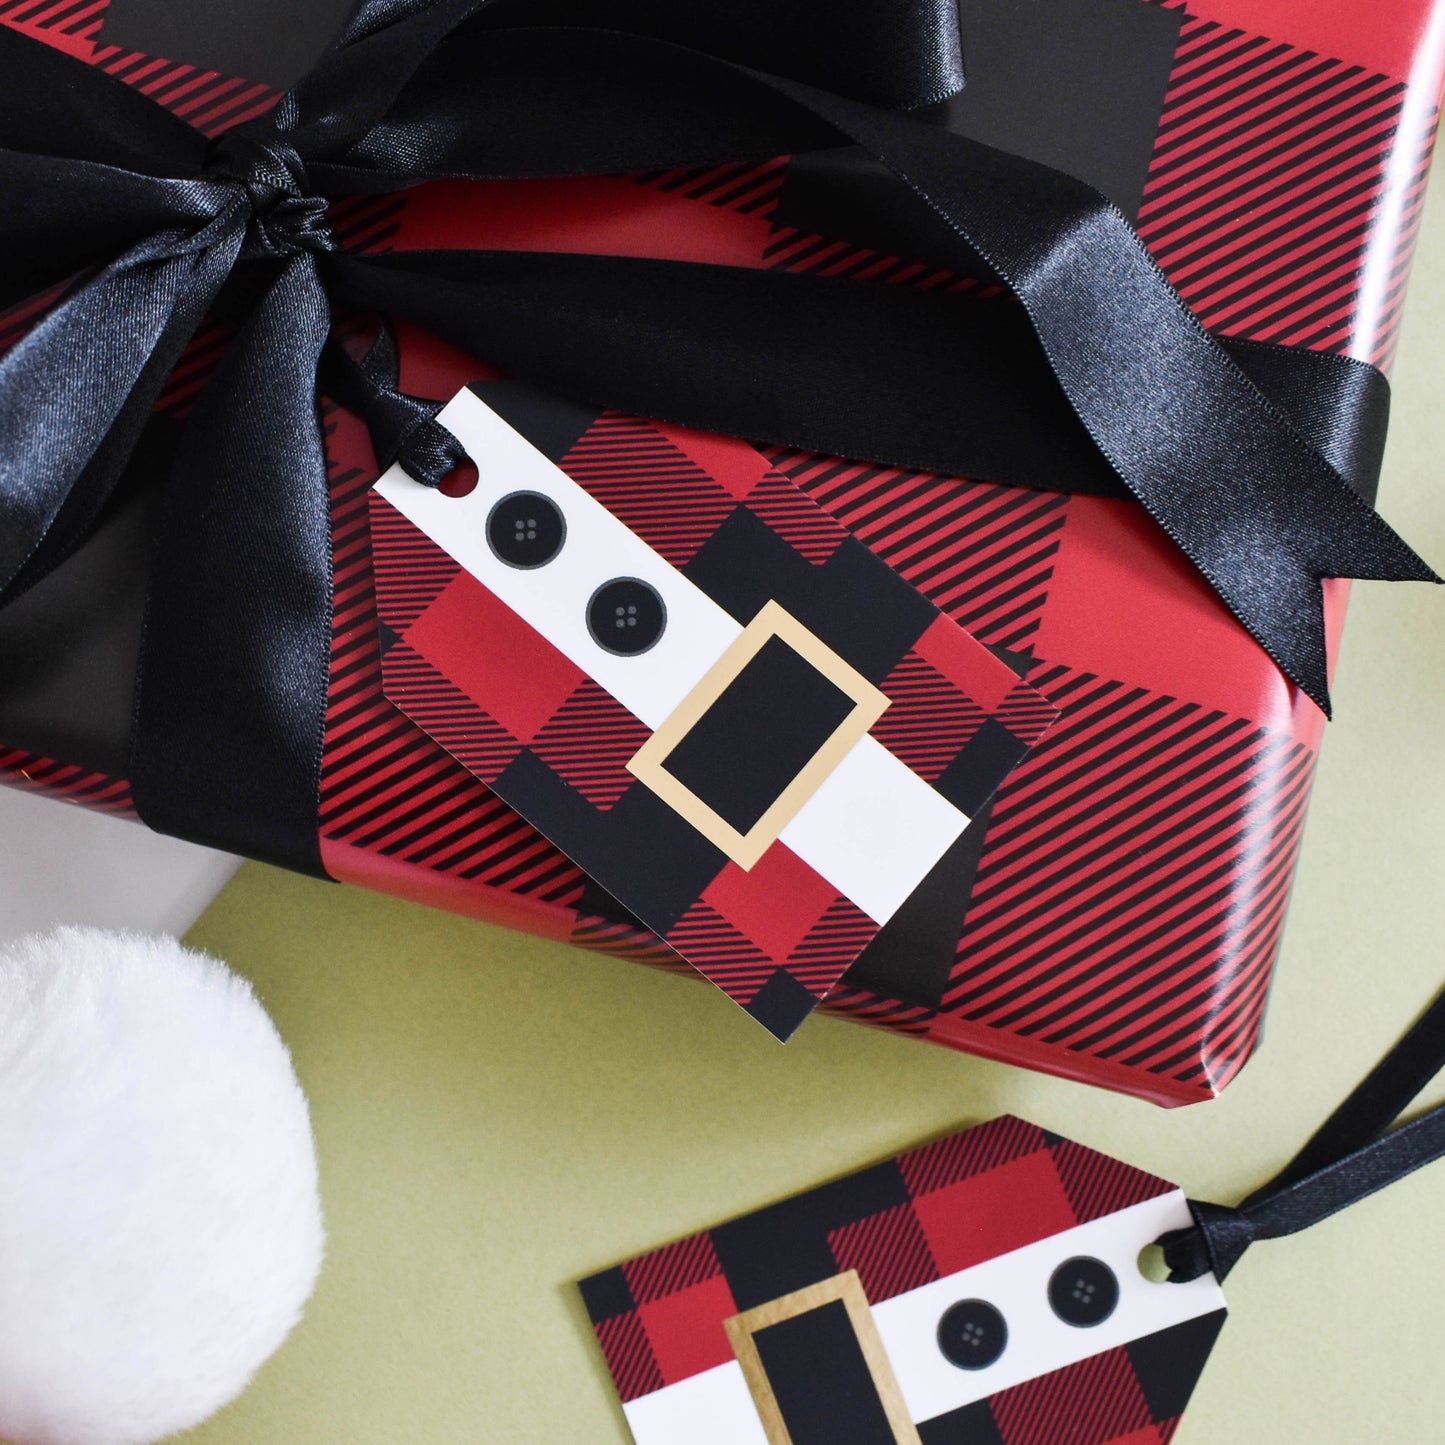 Red check Christmas wrapping paper from Purple Tree Designs